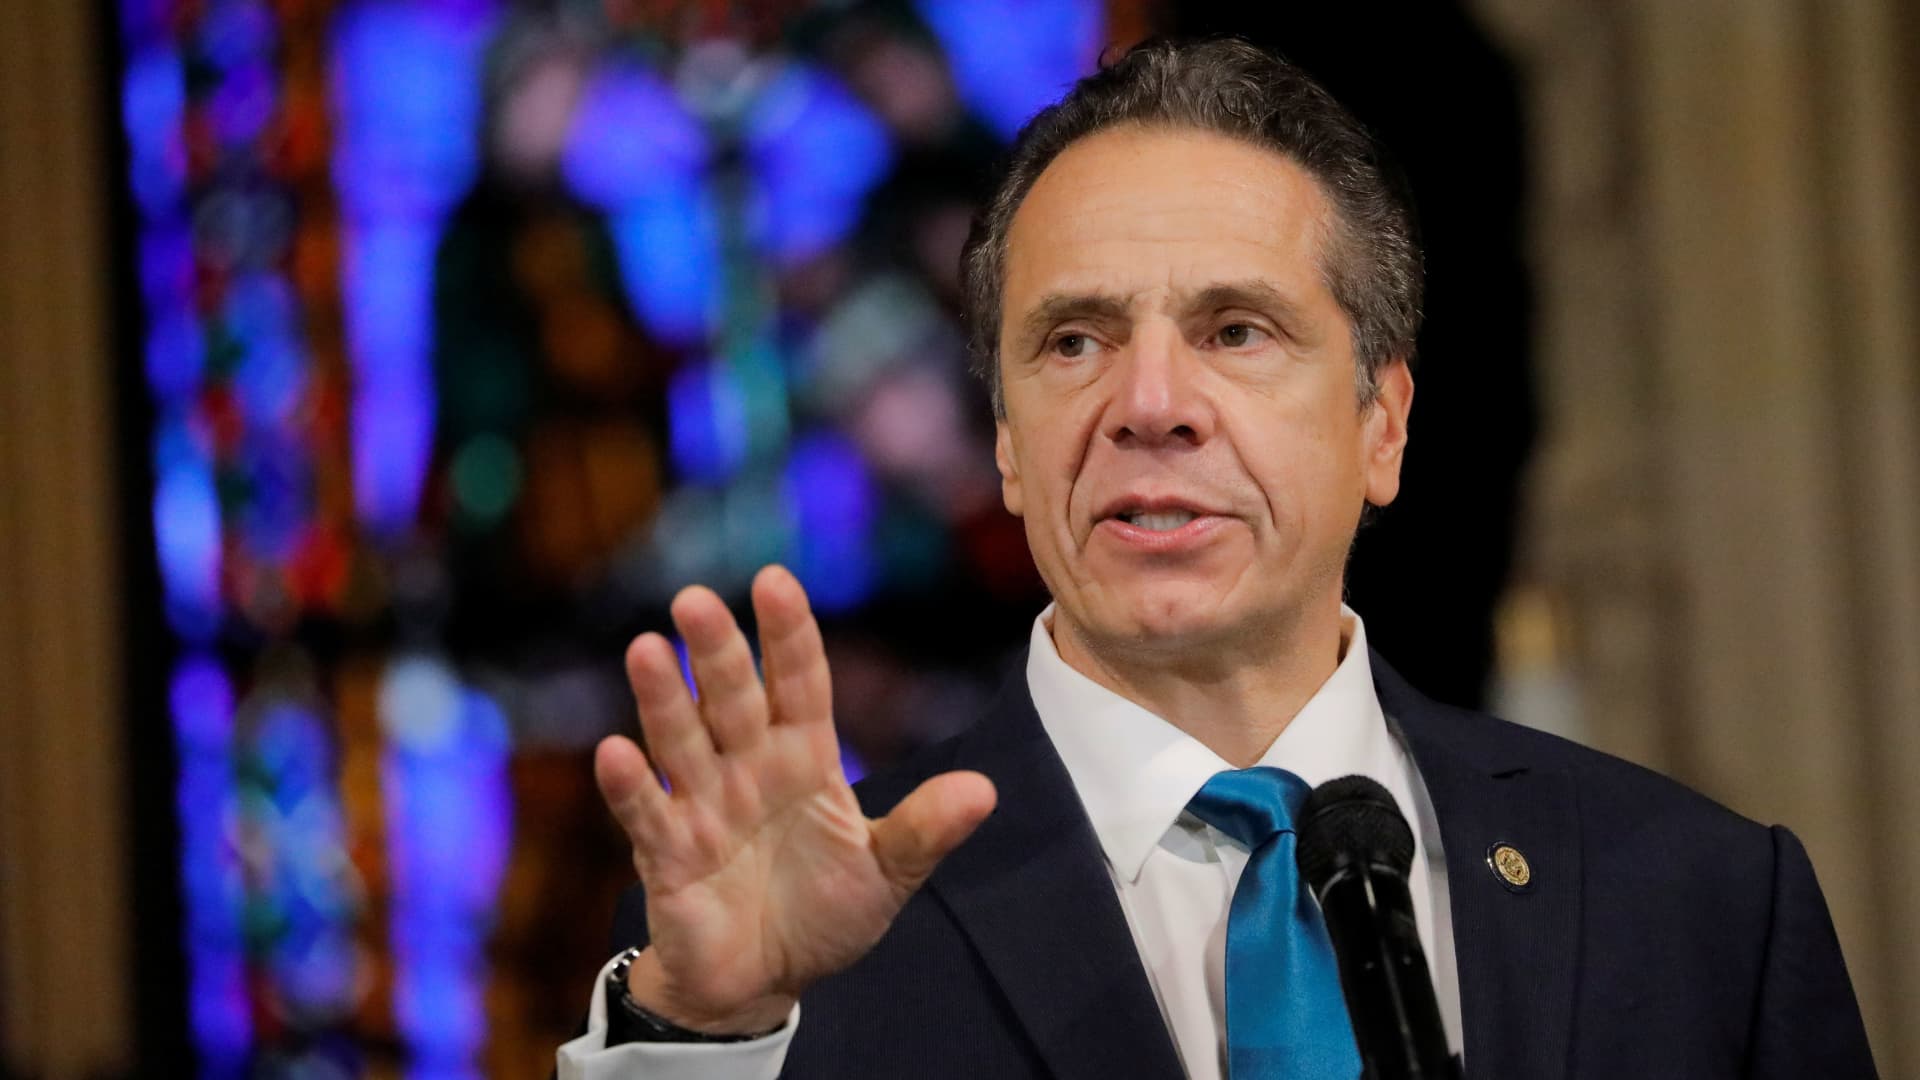 New York Governor Andrew Cuomo delivers remarks on the coronavirus disease (COVID-19) at the Riverside Church in Manhattan, New York City, U.S., November 15, 2020.